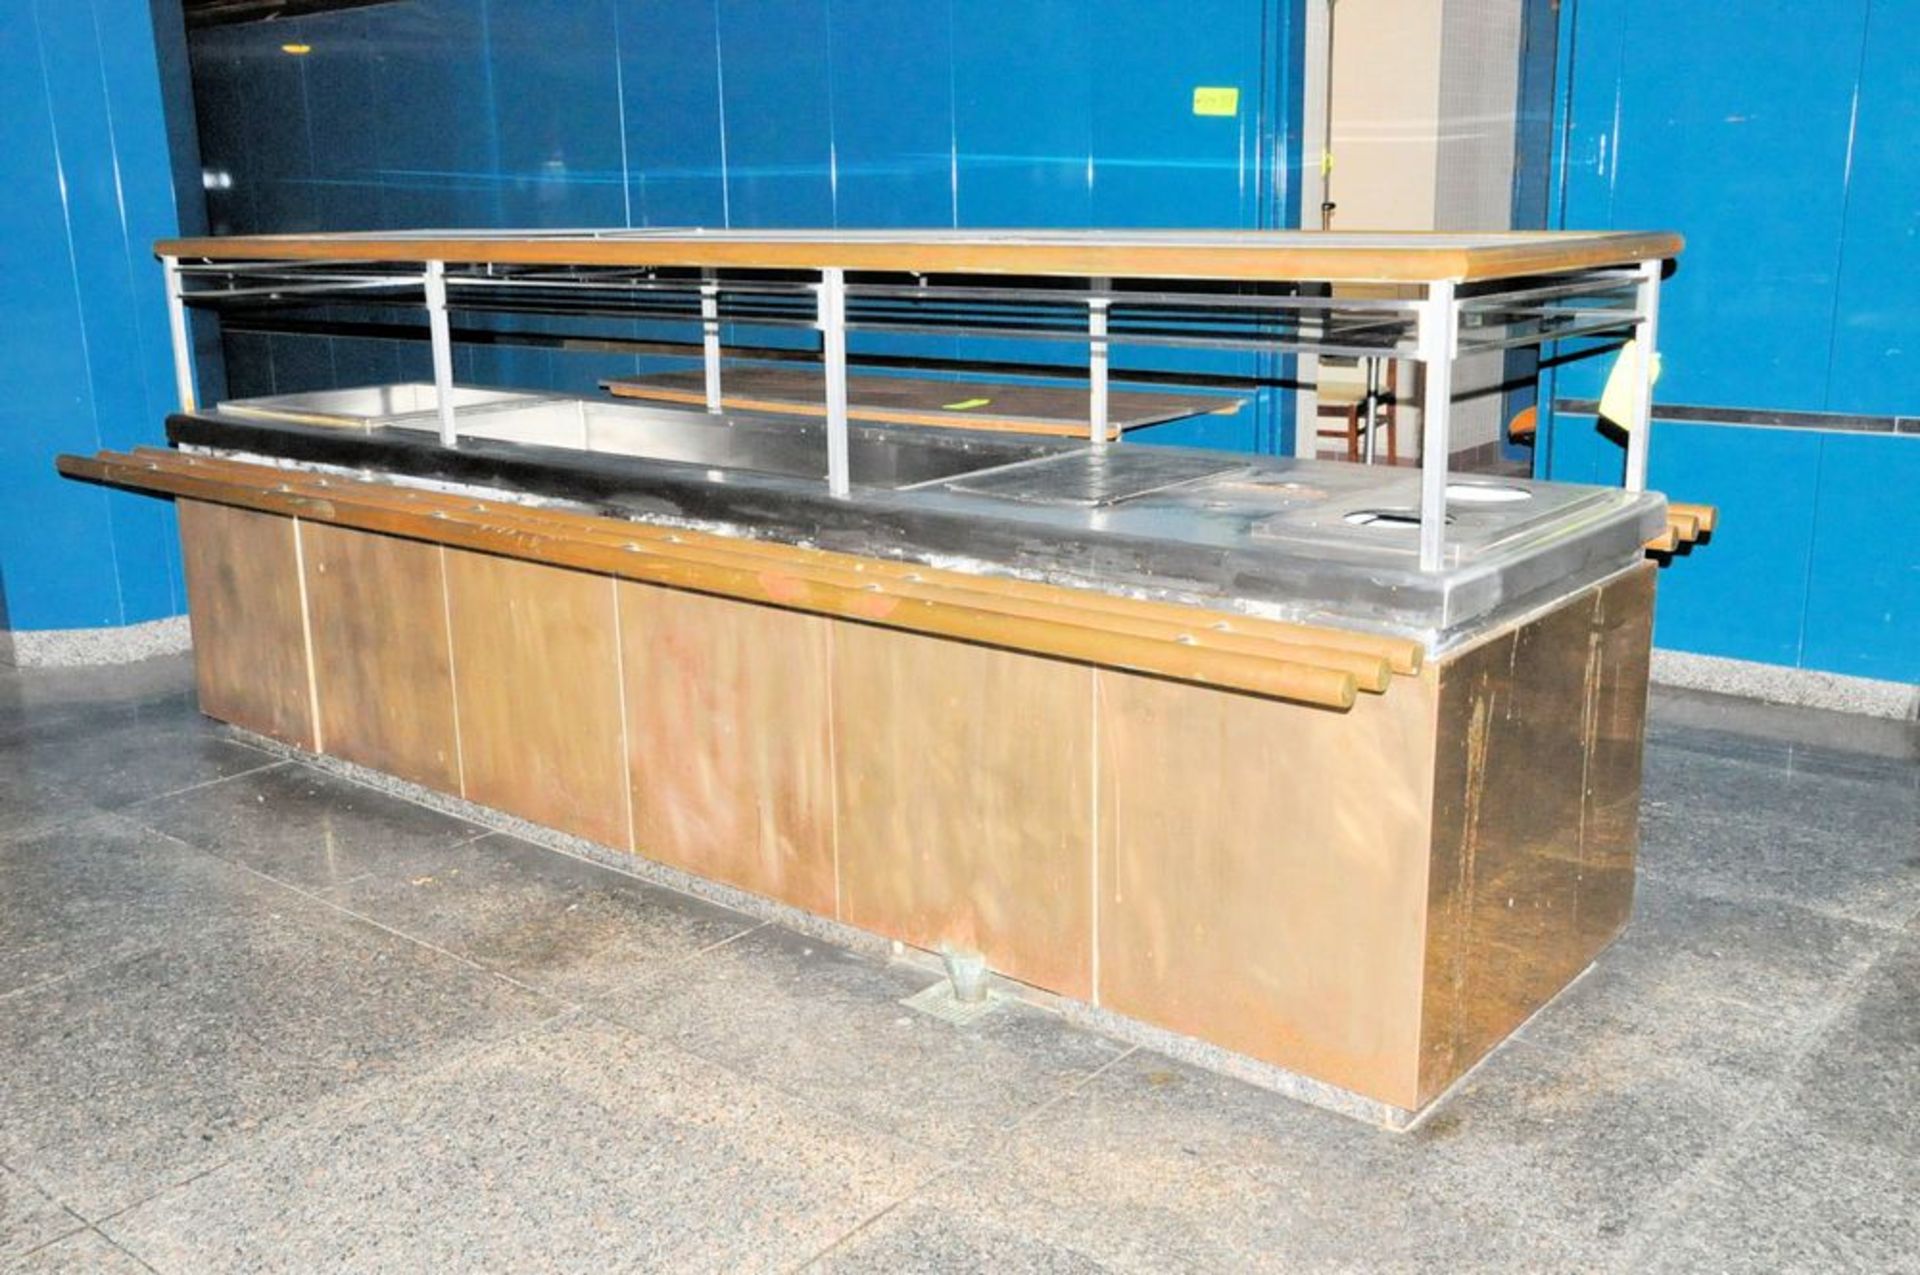 Stainless Steel Hot Foods Buffet Station, 3' x 12', Overhead Glass Sneeze Guard Hood - Image 5 of 8